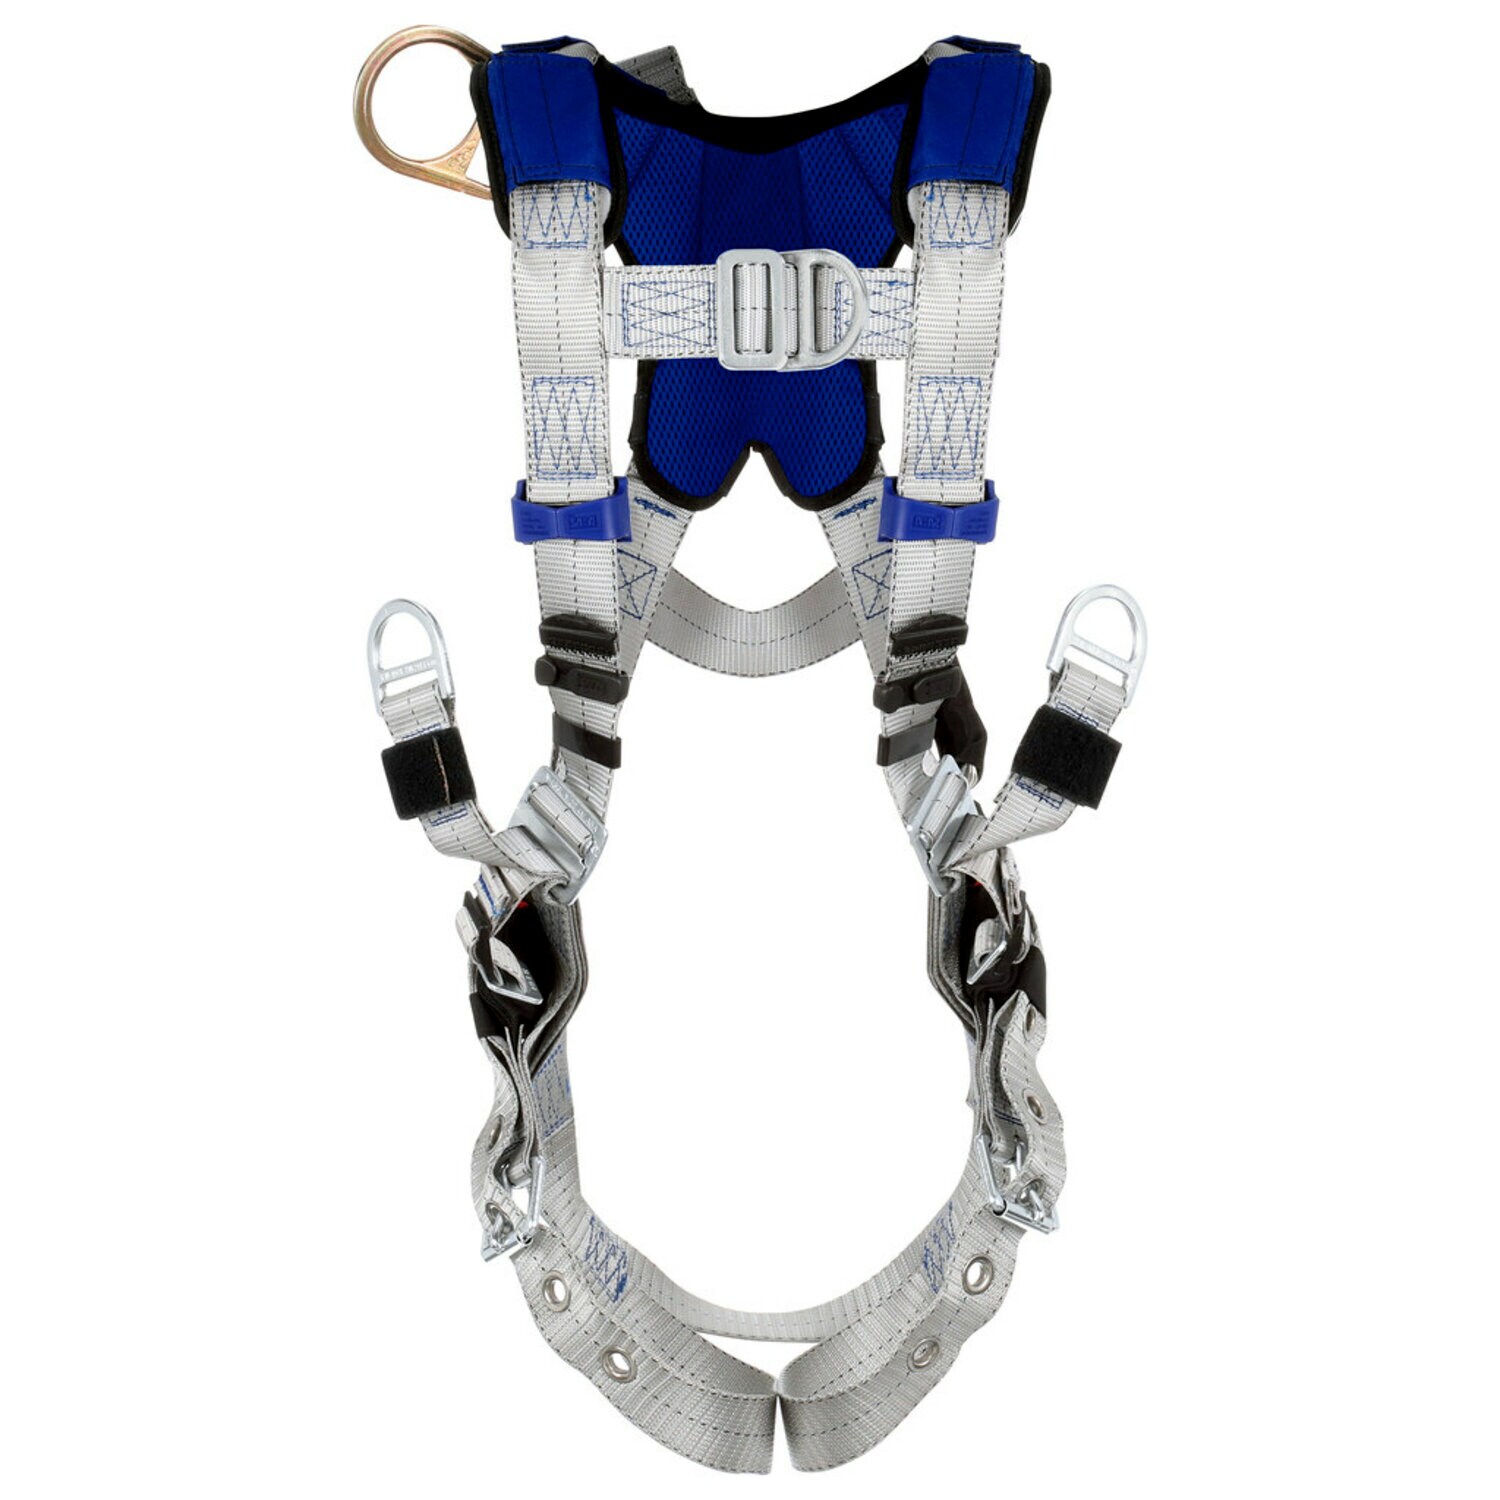 7012817635 - 3M DBI-SALA ExoFit X100 Comfort Oil & Gas Climbing/Positioning/Suspension Safety Harness 1401153, X-Large